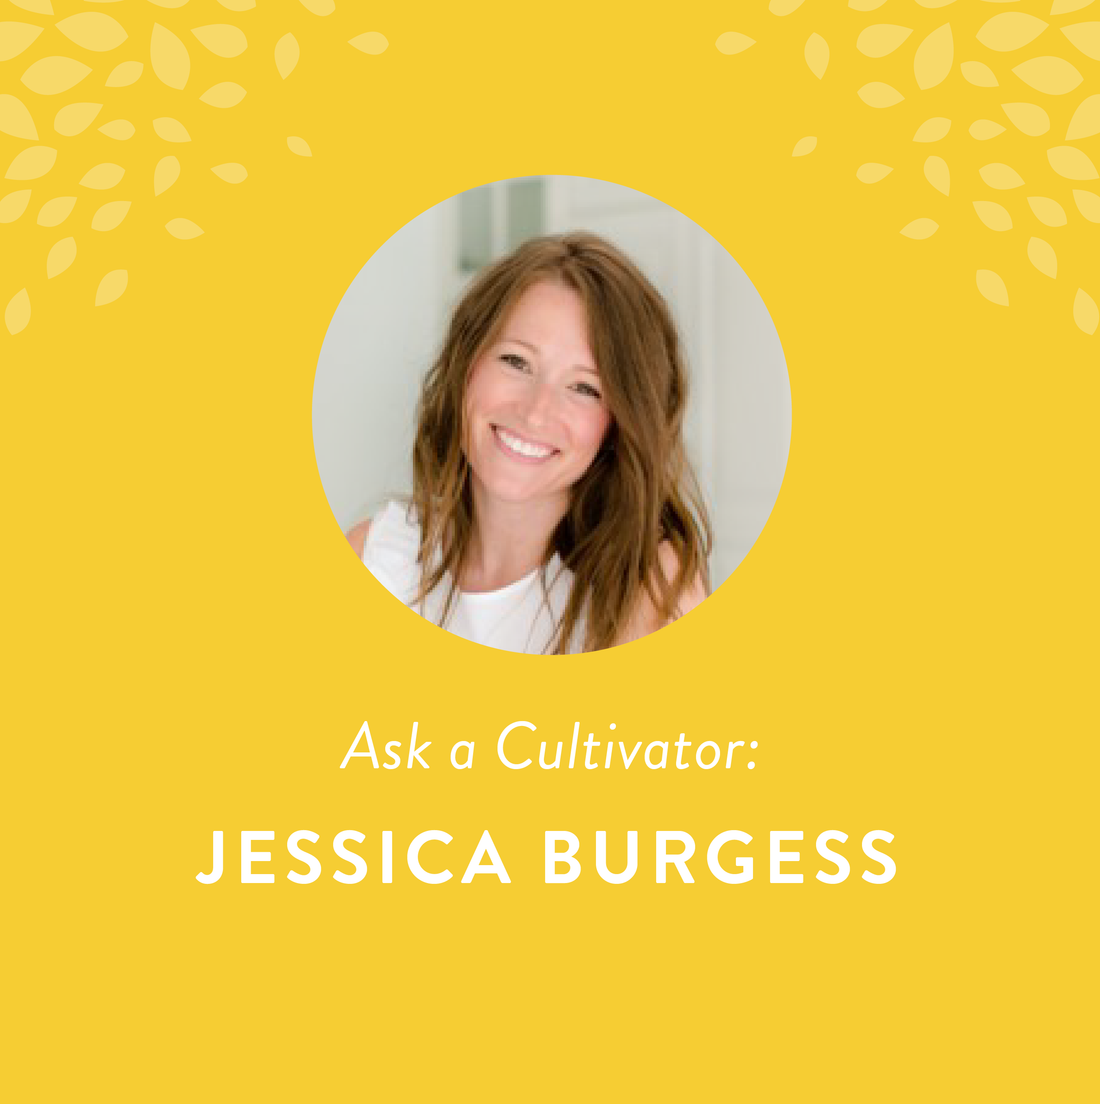 Ask a Cultivator: Jessica Burgess from Fantabulosity